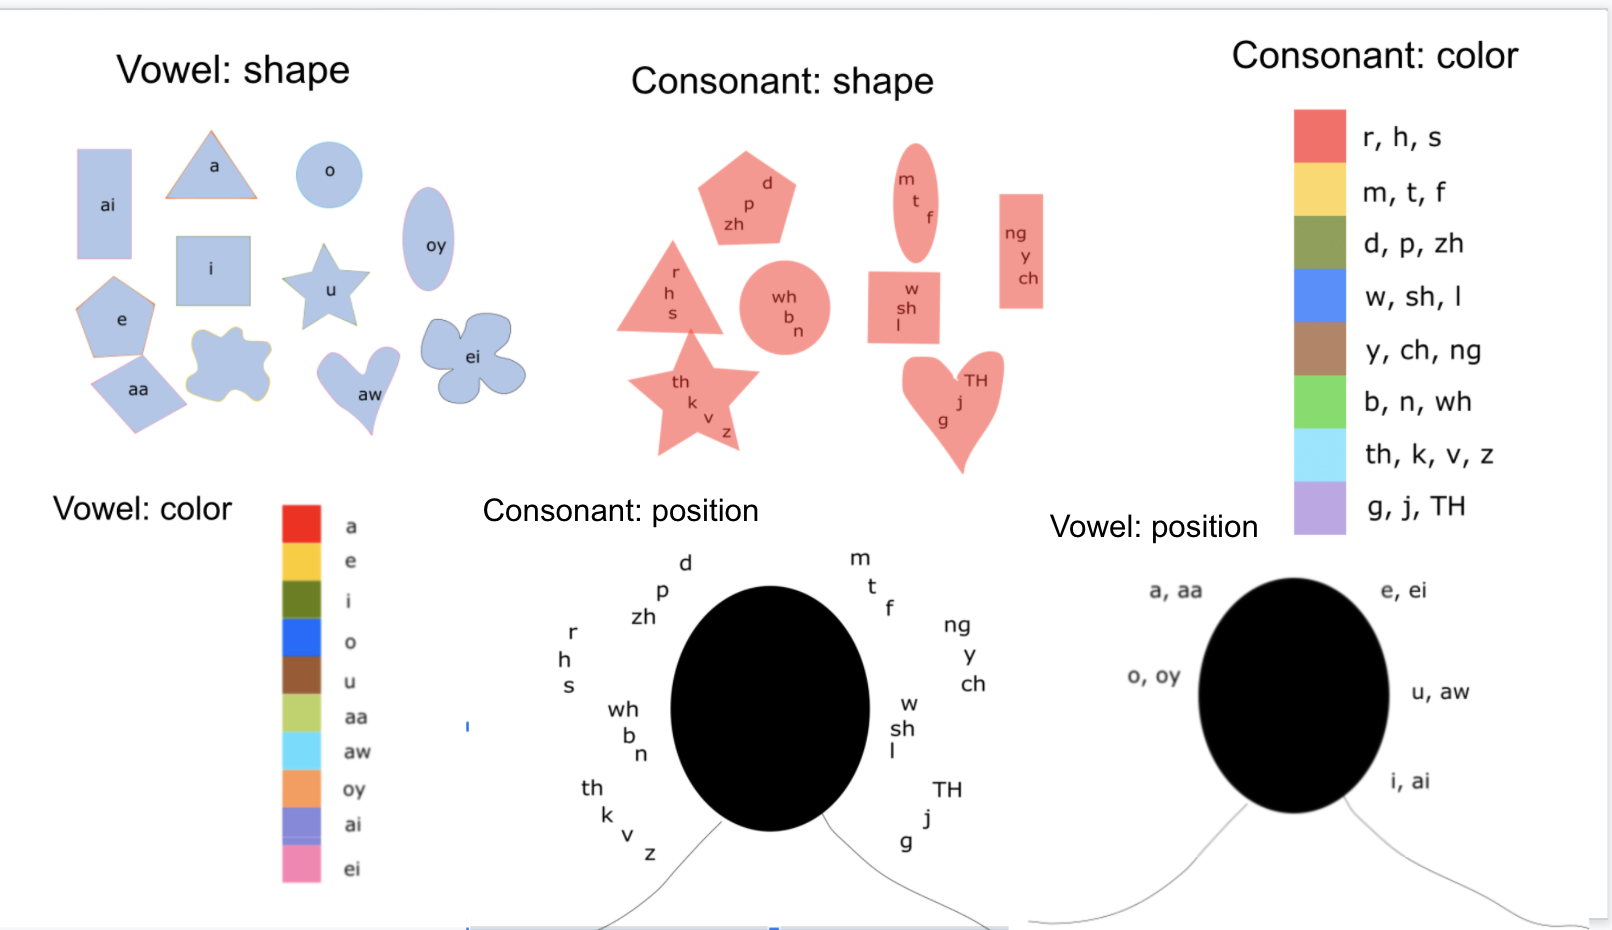 shapes and colors and positions mapped to phonemes